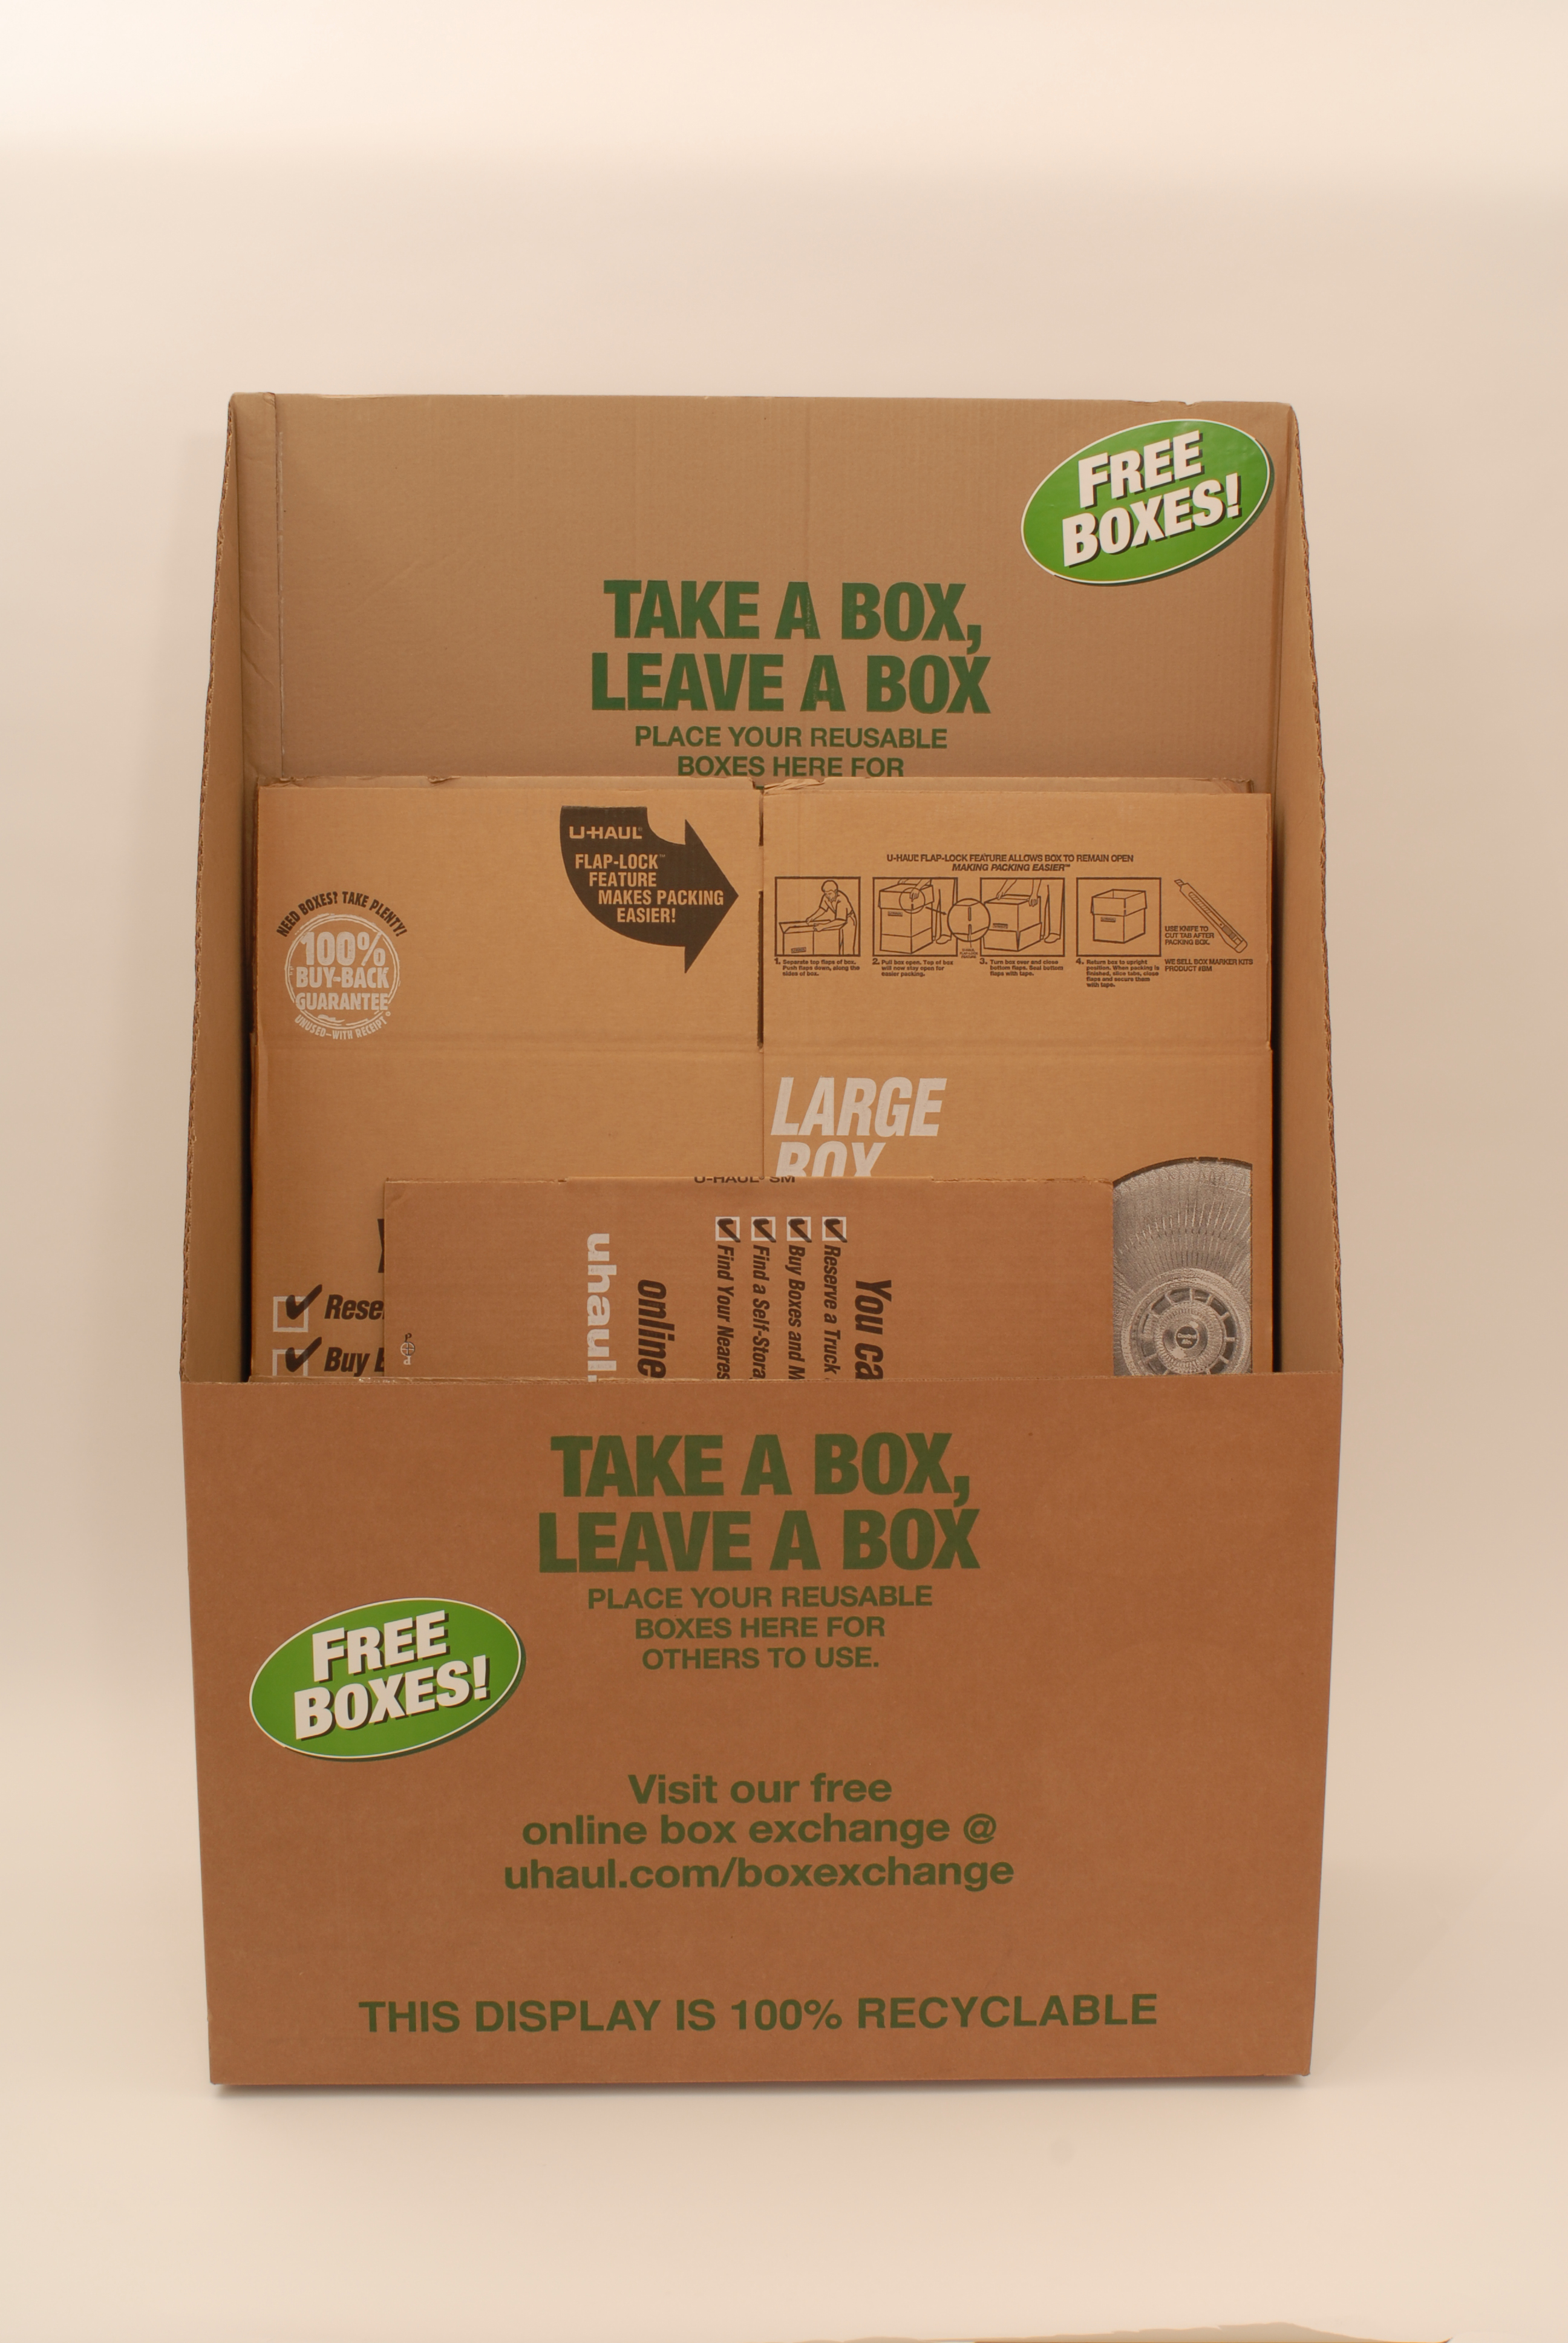 Go "Green" for the Holidays with FREE U-Haul Boxes